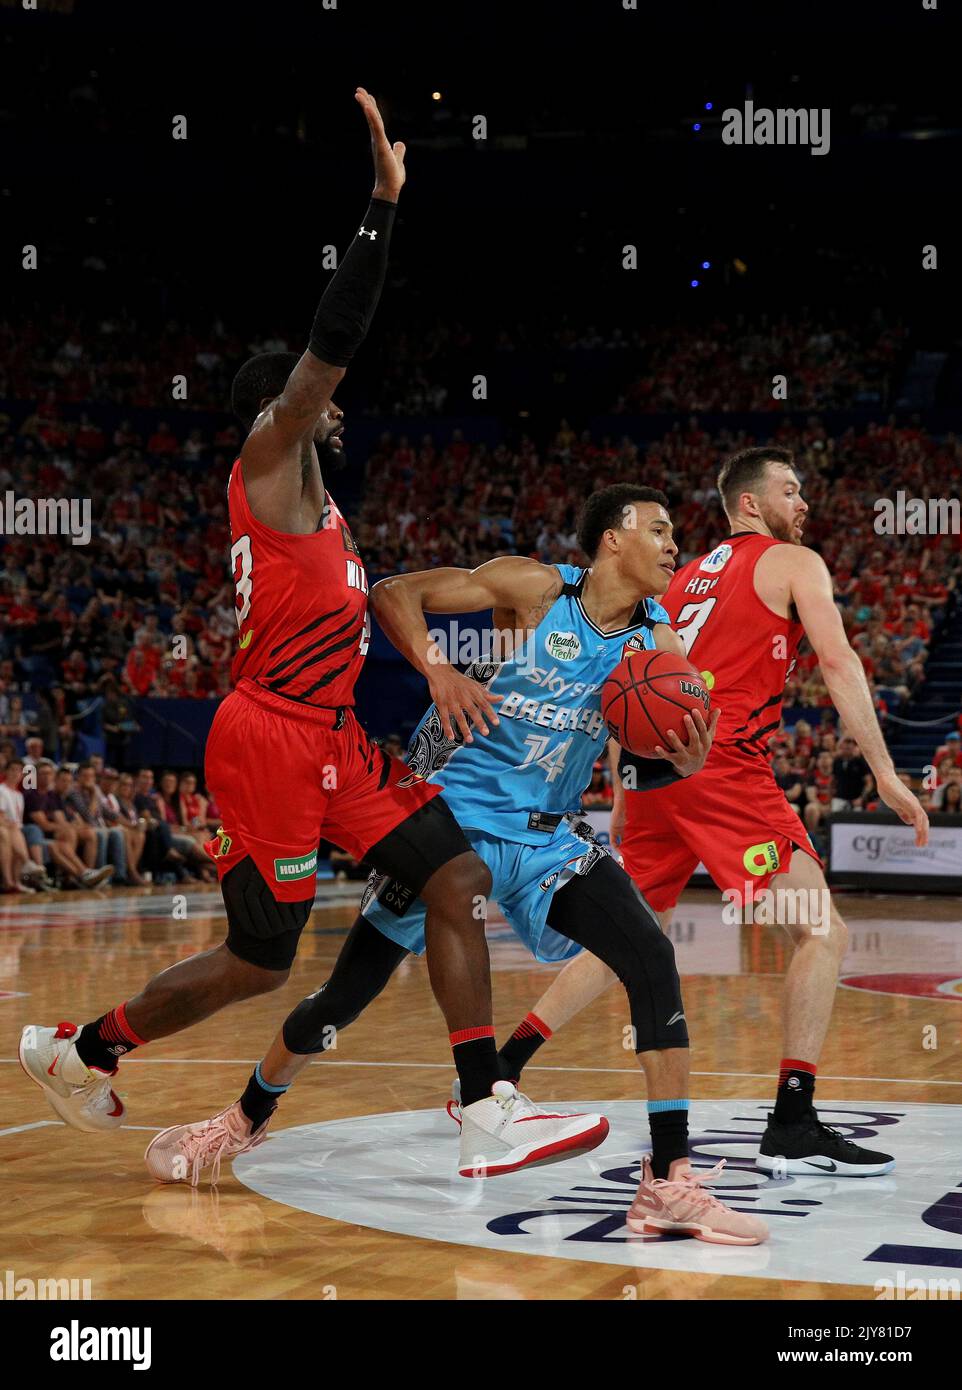 Rj Hampton Of The Breakers In Action During The Round 7 Nbl Match Between The Perth Wildcats And